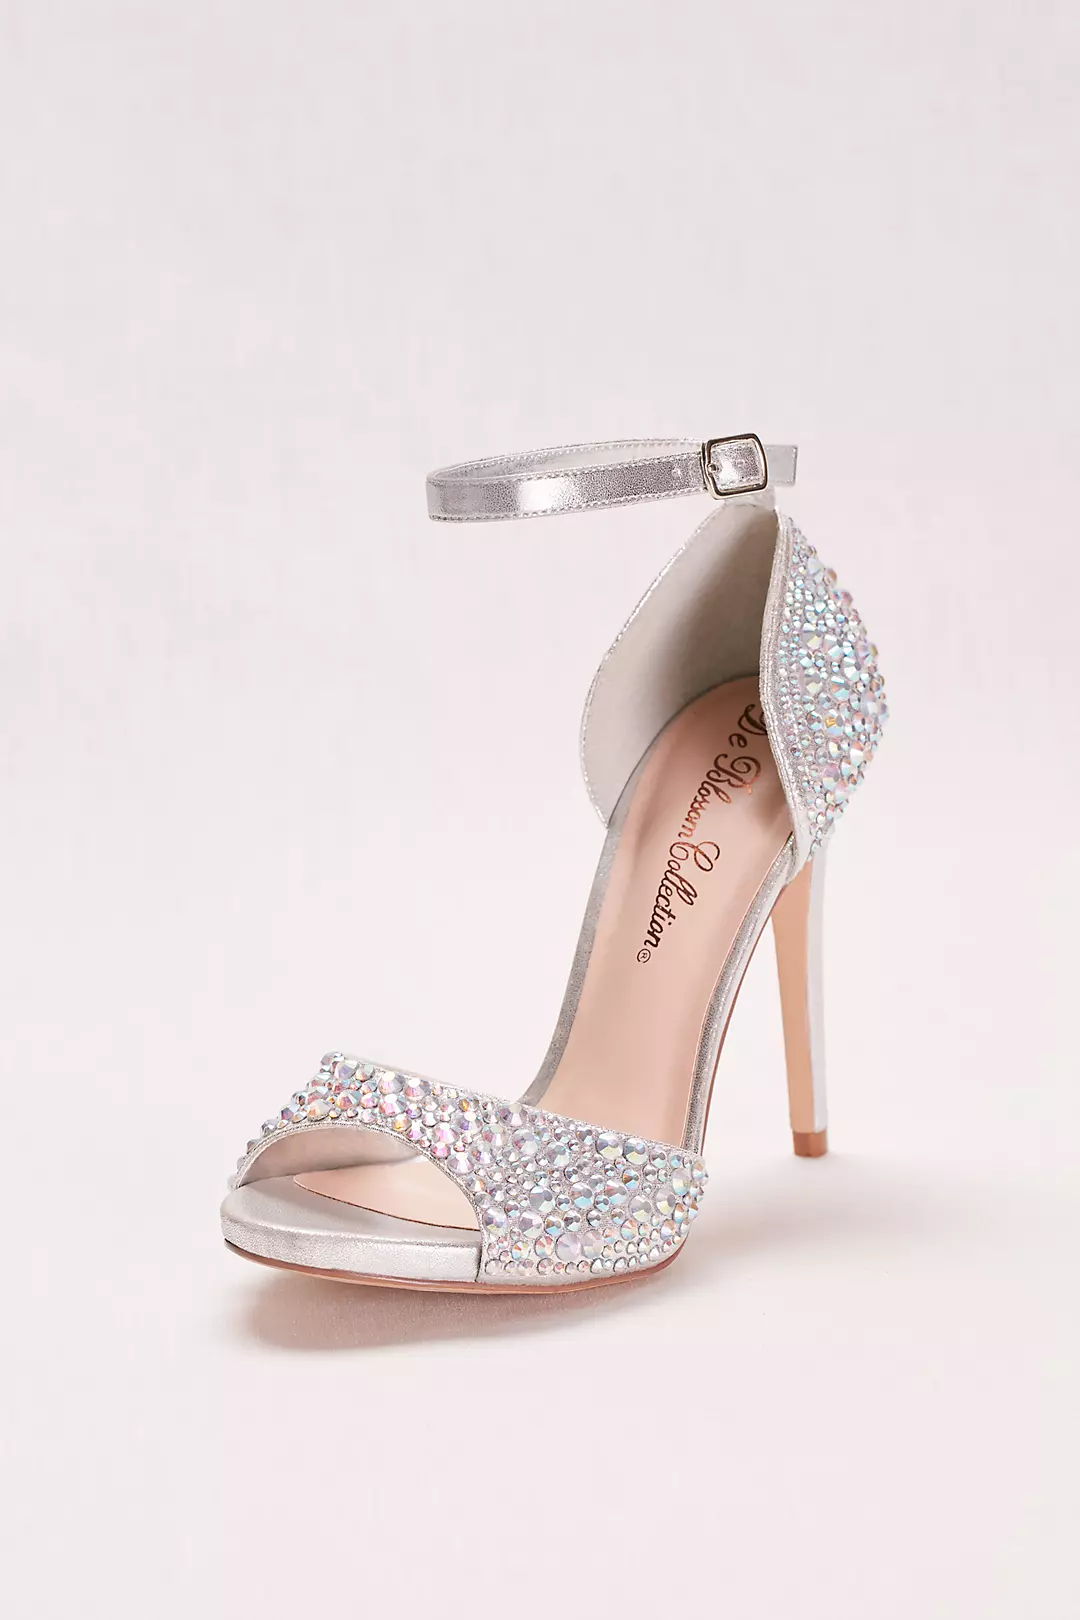 Crystal Peep Toe High Heel with Ankle Strap Image